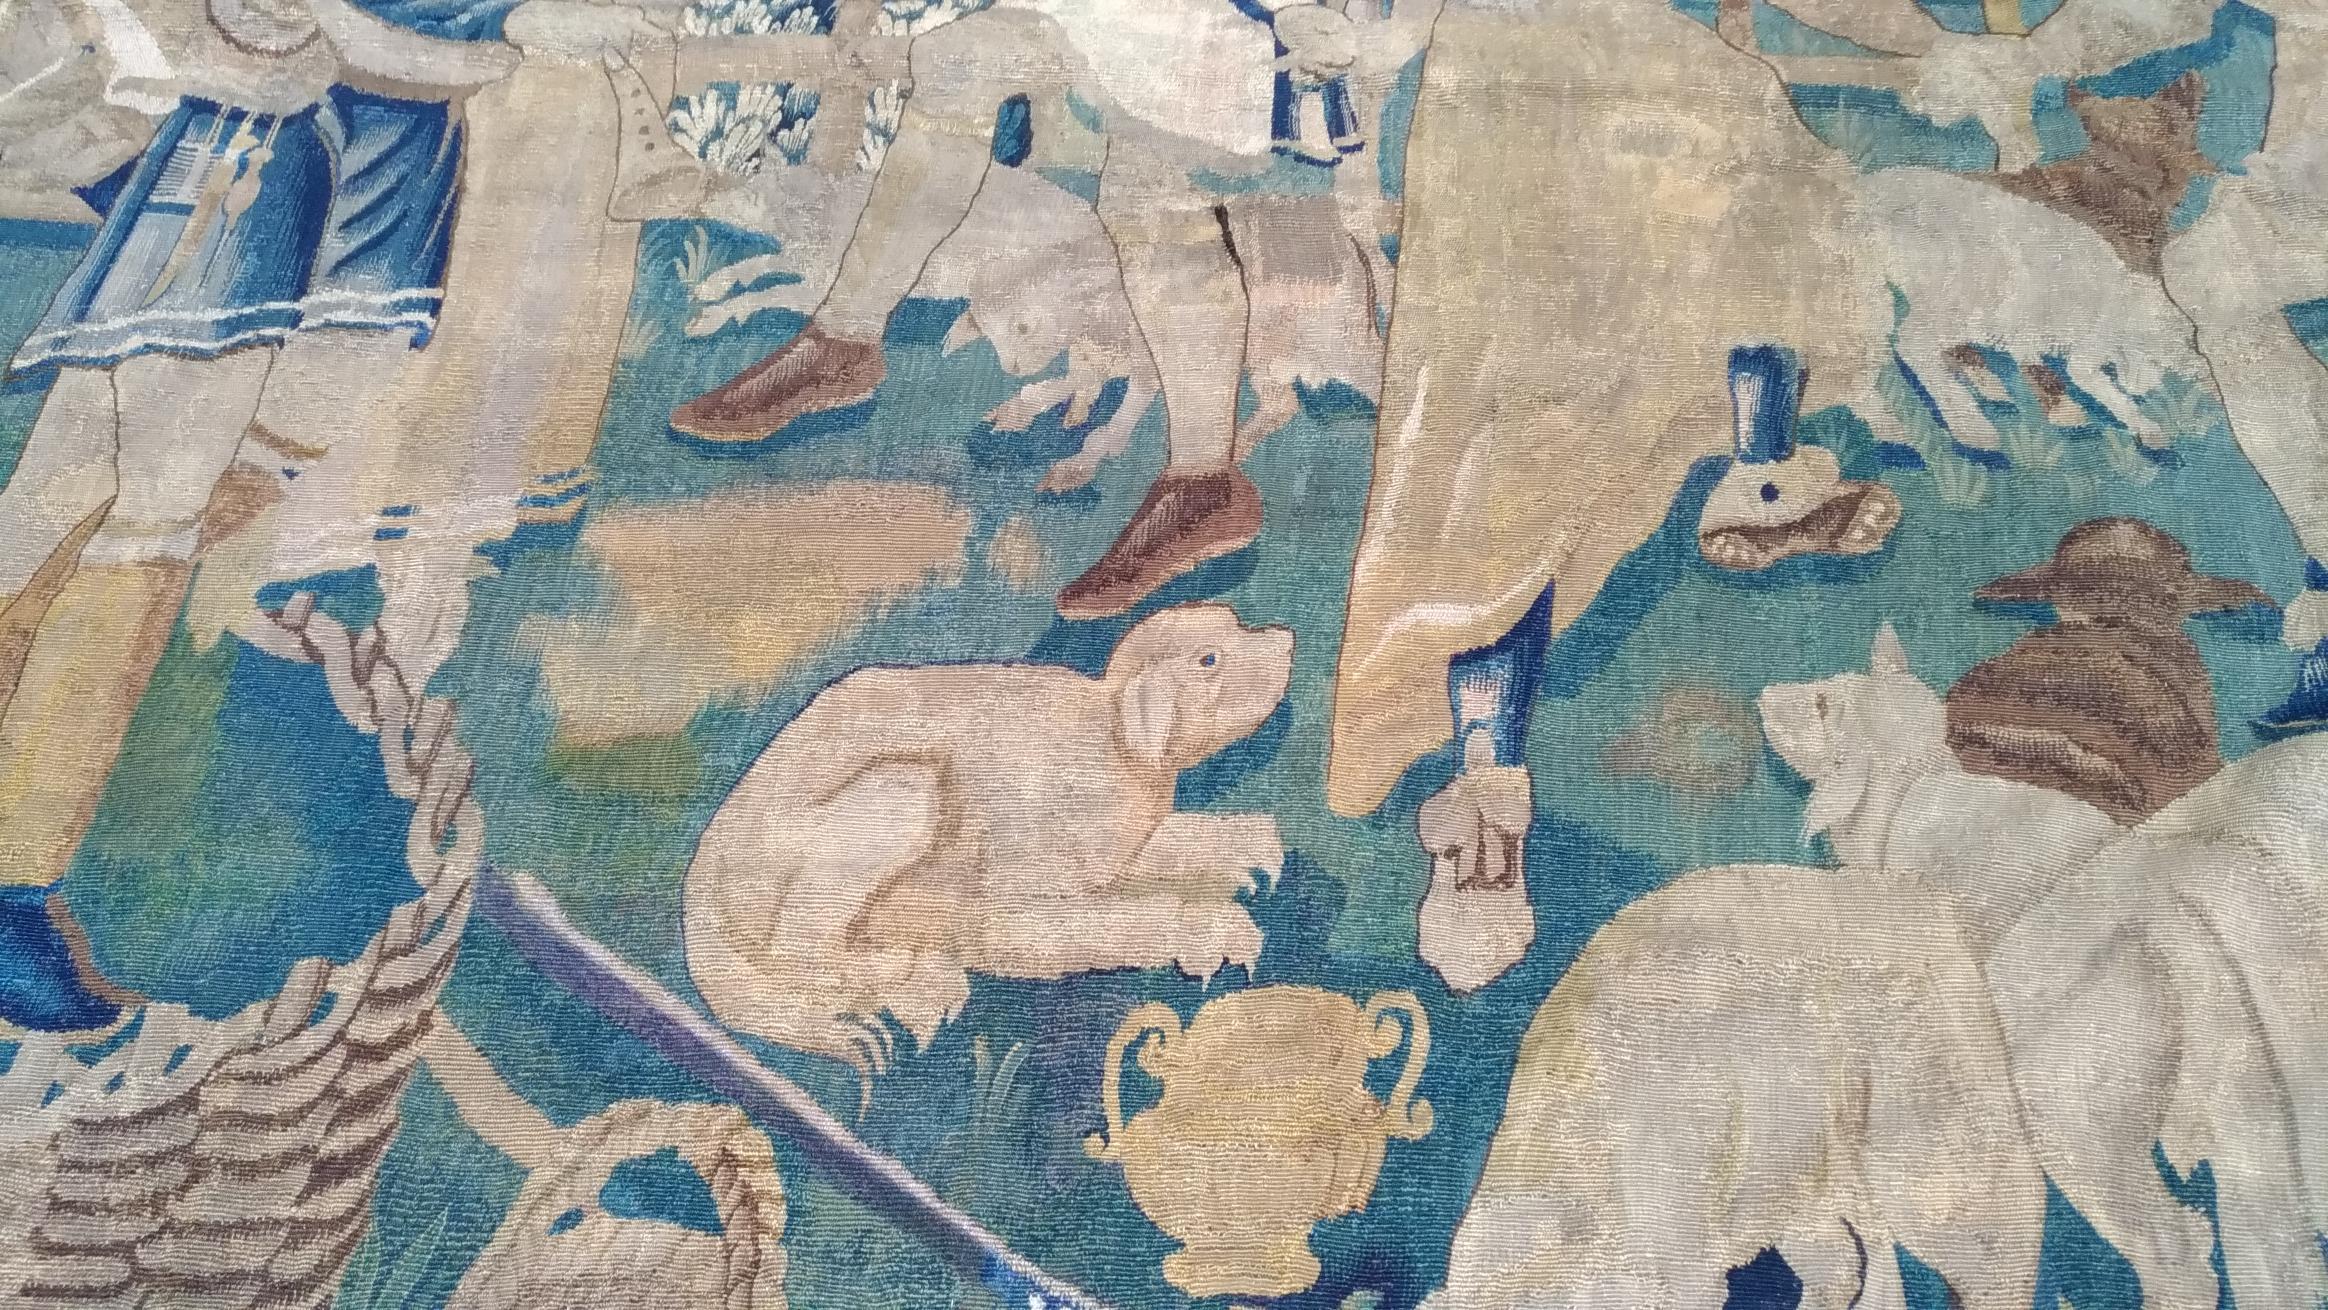 1048 - 17th century Tapestry village festival.
Thanks to our Restoration-Conservation workshop and also Our know-how, 
we are pleased to present to you works of art in fabric such as Tapestry, 
Carpets and Textiles in very good conservation quality